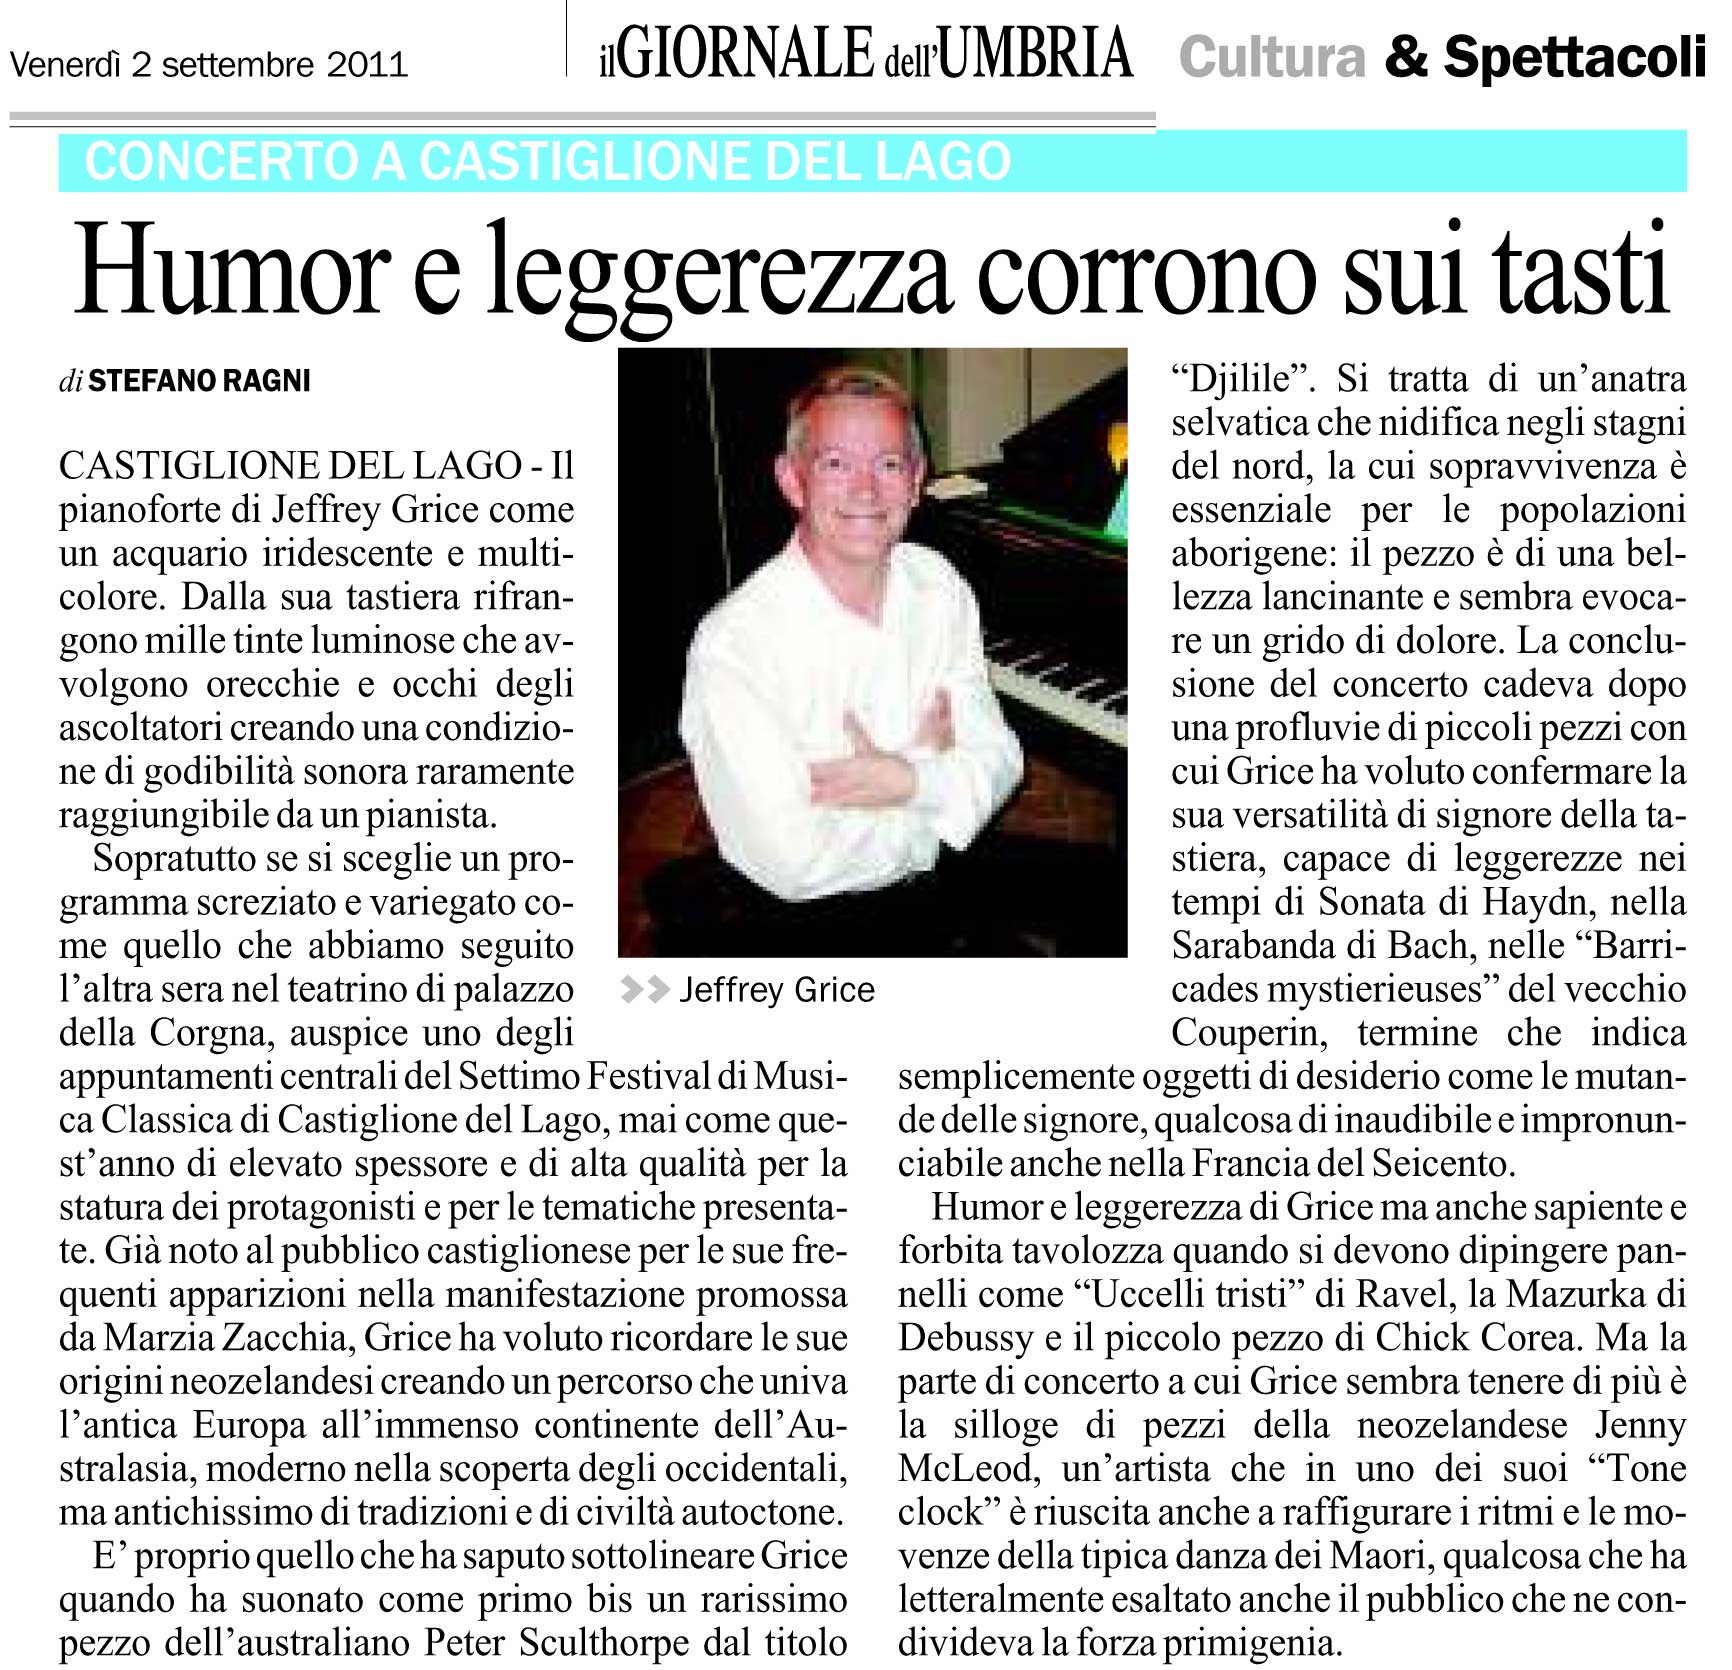 critic-from-Il-Giornale-dell-Umbria-Friday-September2-2011w